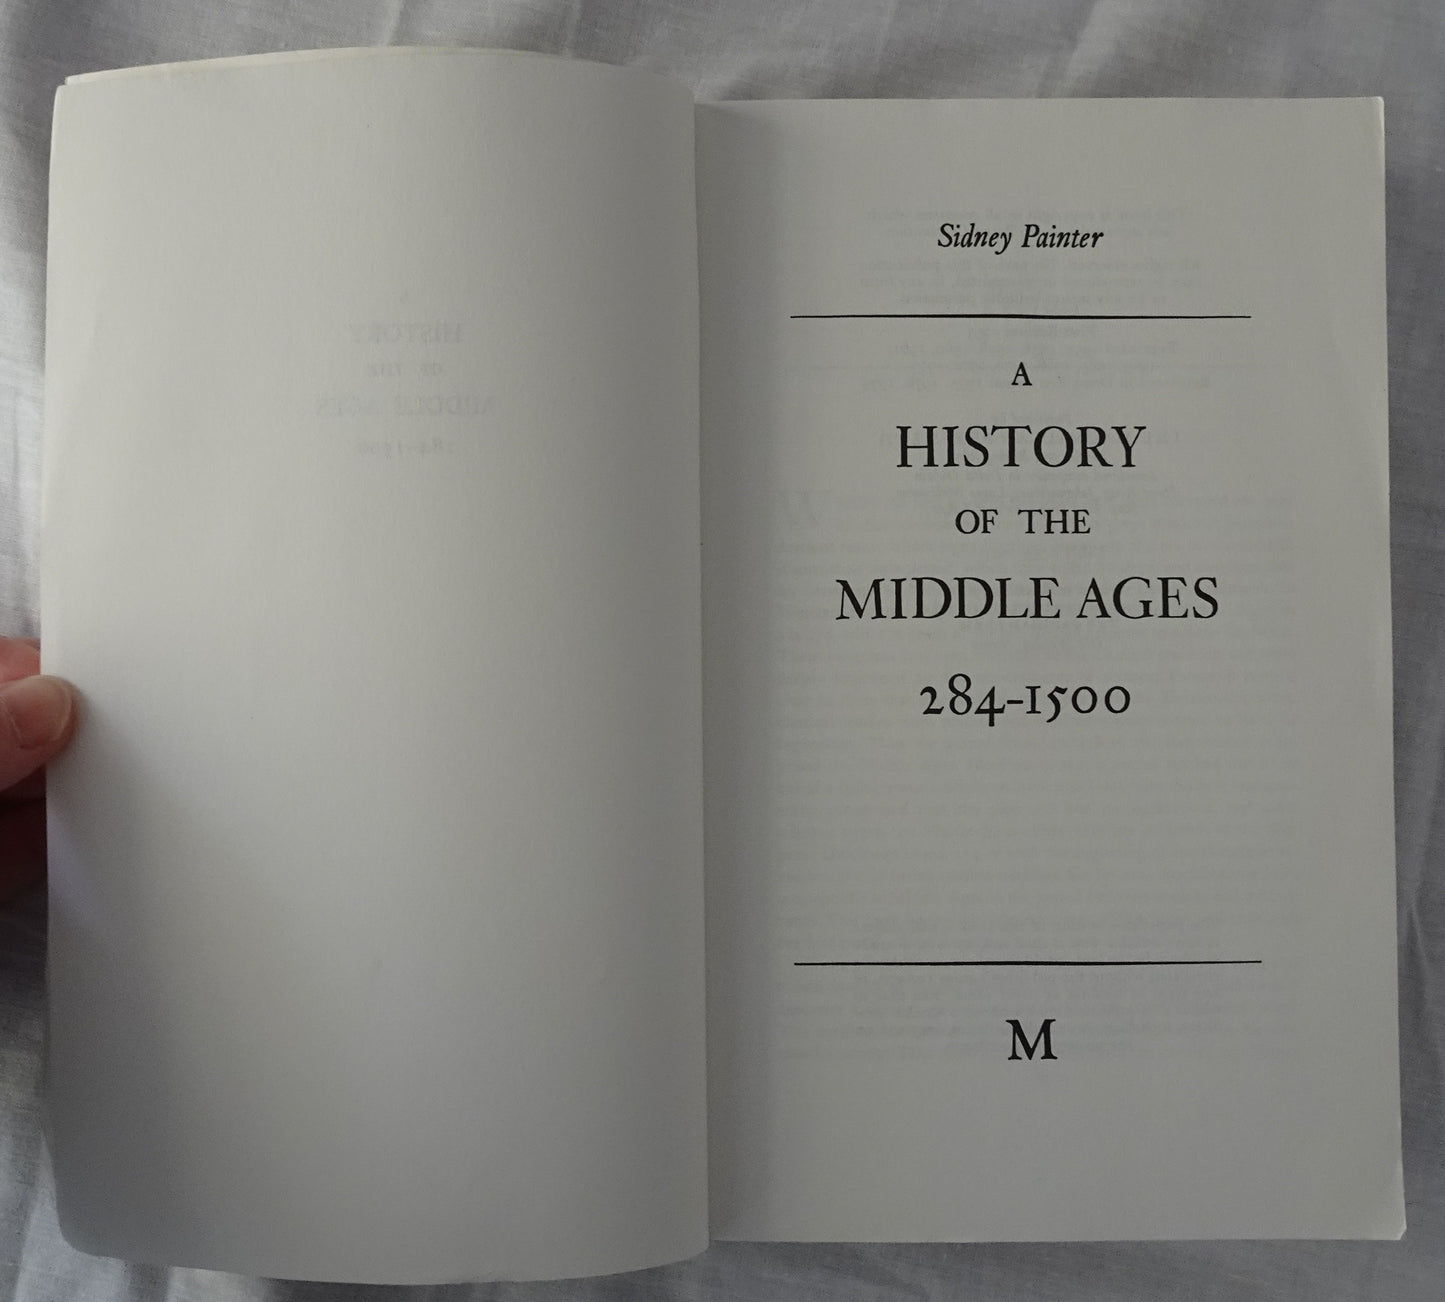 A History of the Middle Ages by Sidney Painter